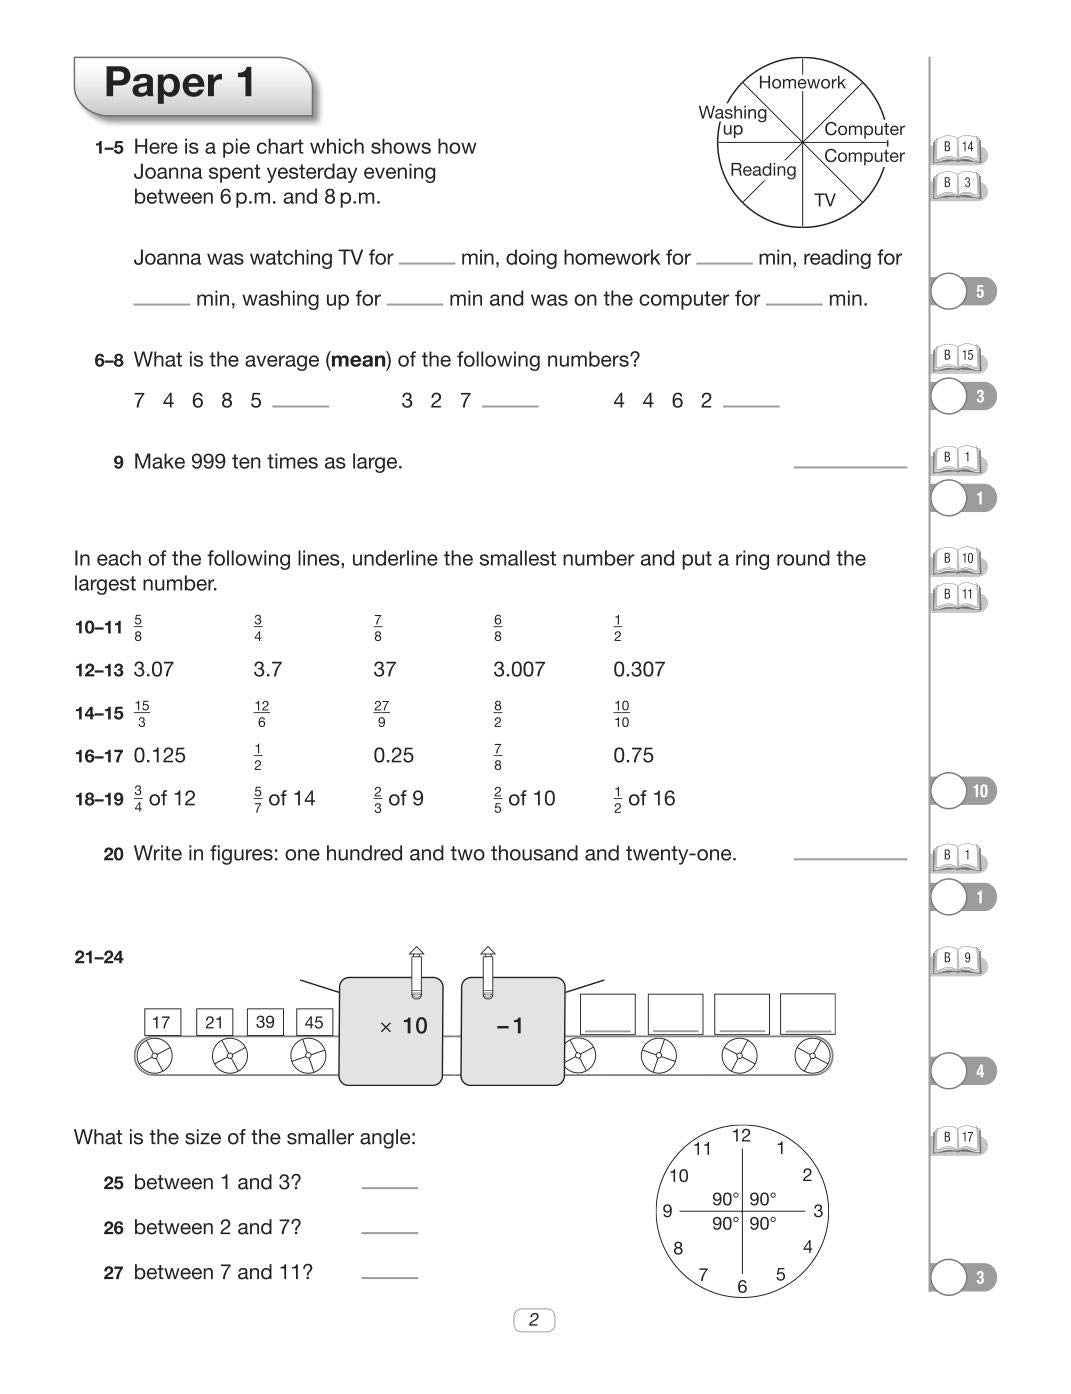 Bond 11+: Maths Assessment Papers 10-11 Years Book 1 - The English Bookshop Kuwait